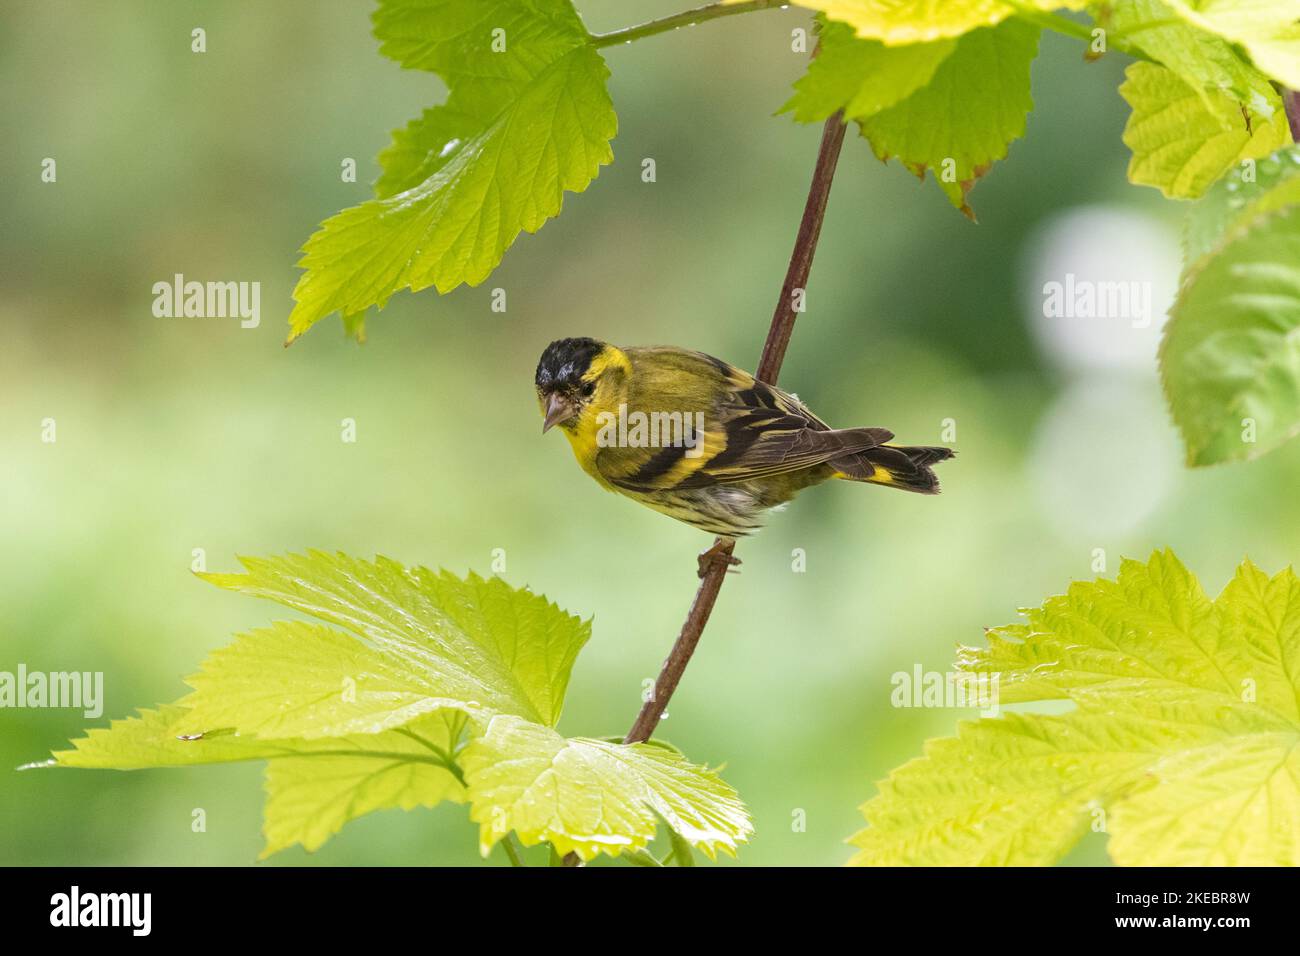 Siskin (Carduelis spinus) with damp feathers from rain perched on golden hop in UK garden Stock Photo